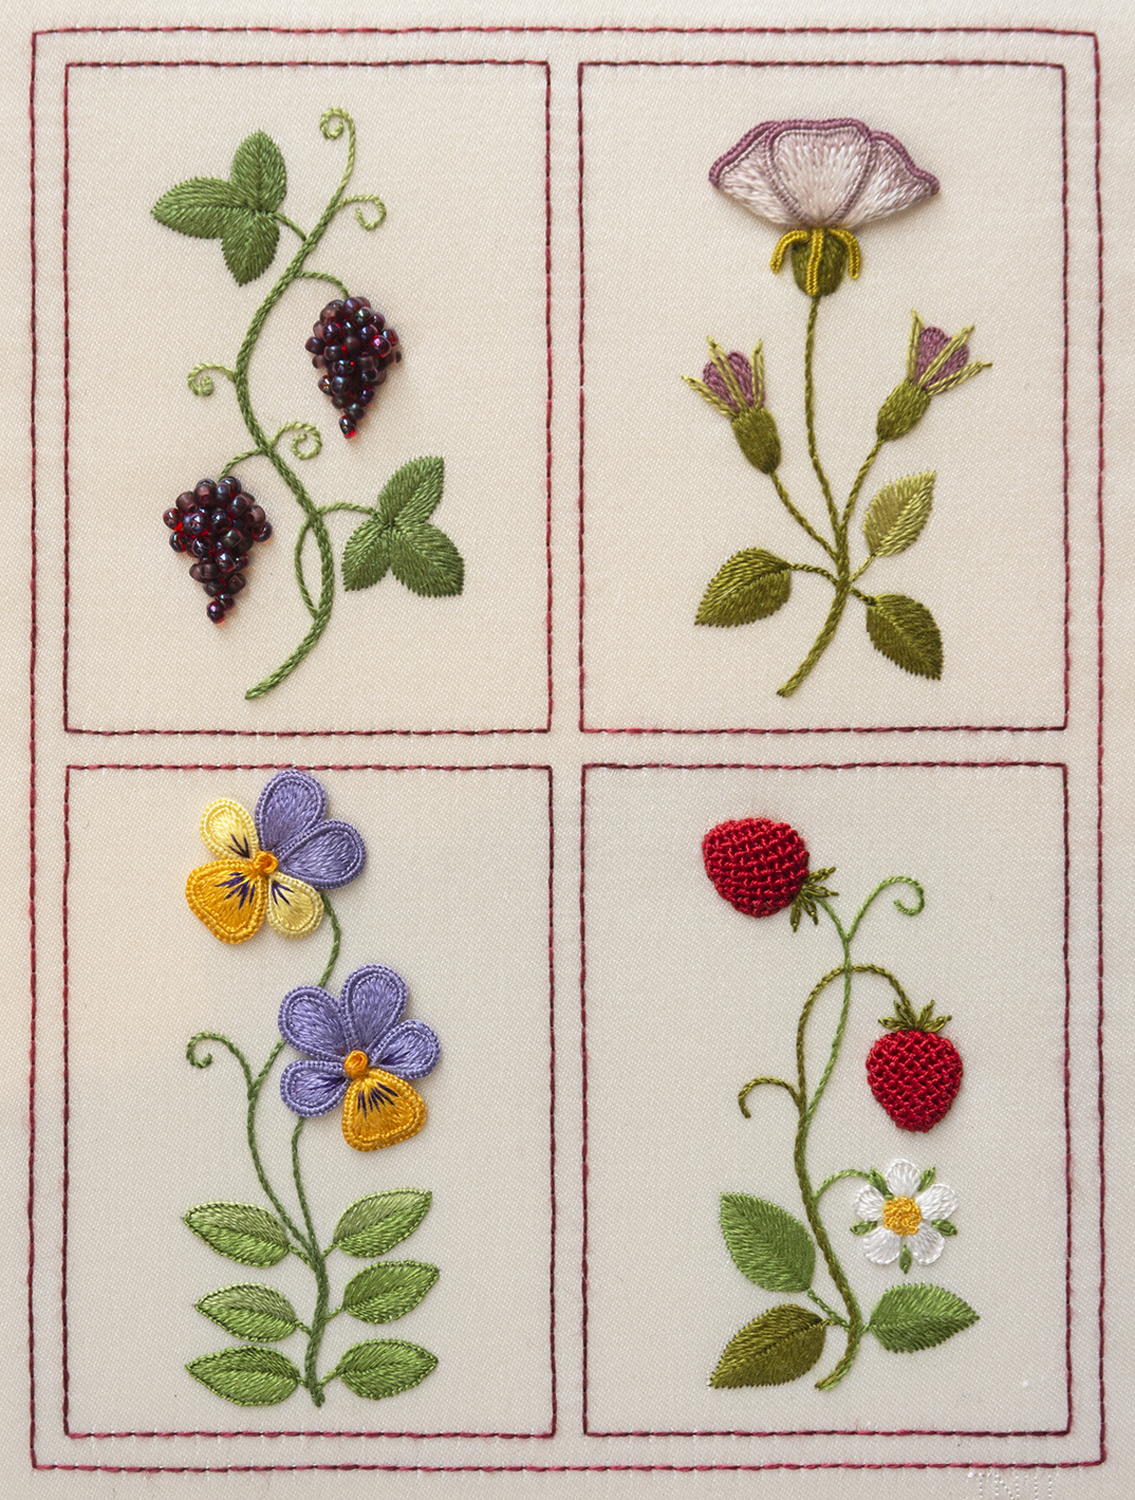 Shakespeare’s Flowers: Sampler One: Sweet Briar, Grapevine, Heartsease and Strawberries – 2 day class